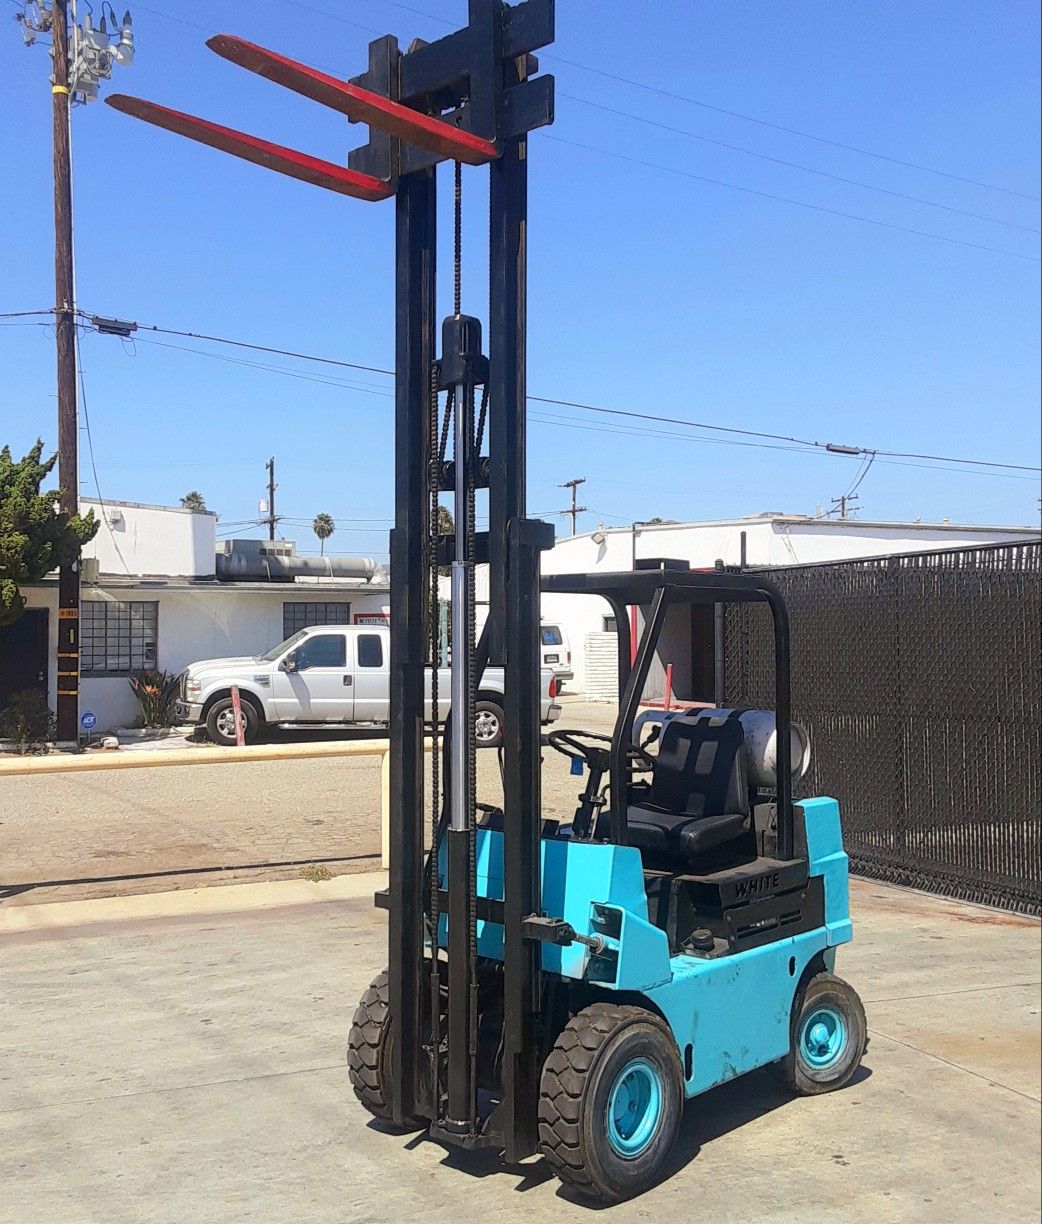 FORKLIFT "WHITE" PNEUMATIC (AIR) $3,190!!!!HEAVY DUTY 4000-LB CAP AUTOMATIC!!! RUNS GREAT %100 ISSUE FREE!!!! $3,190